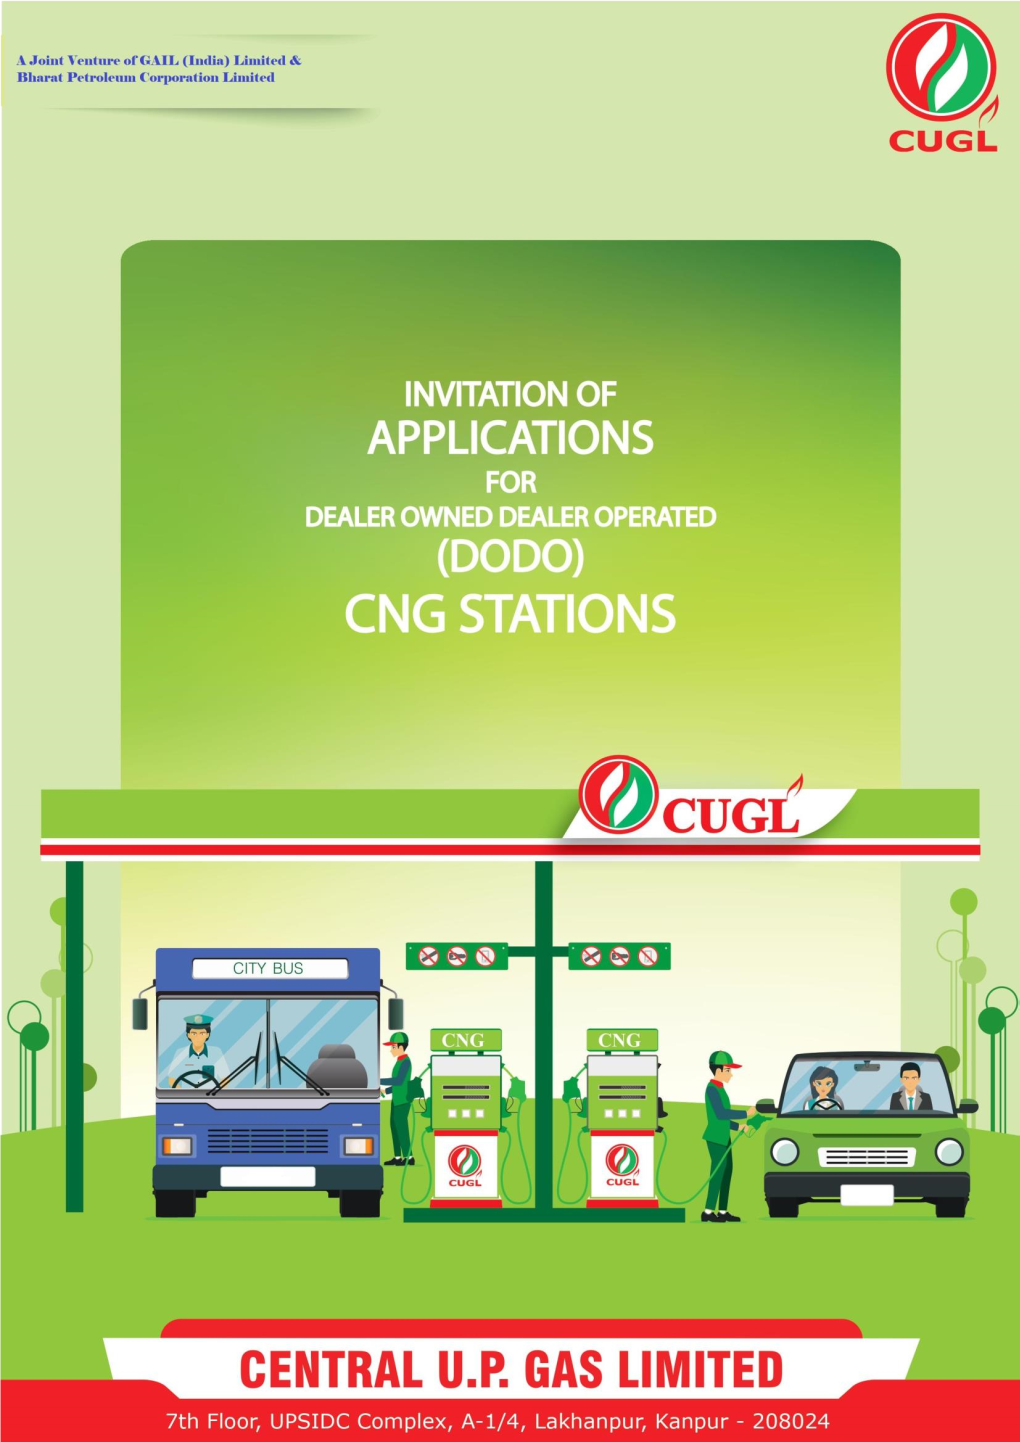 Application for Setting up CNG Stations on DODO (Dealer Owned